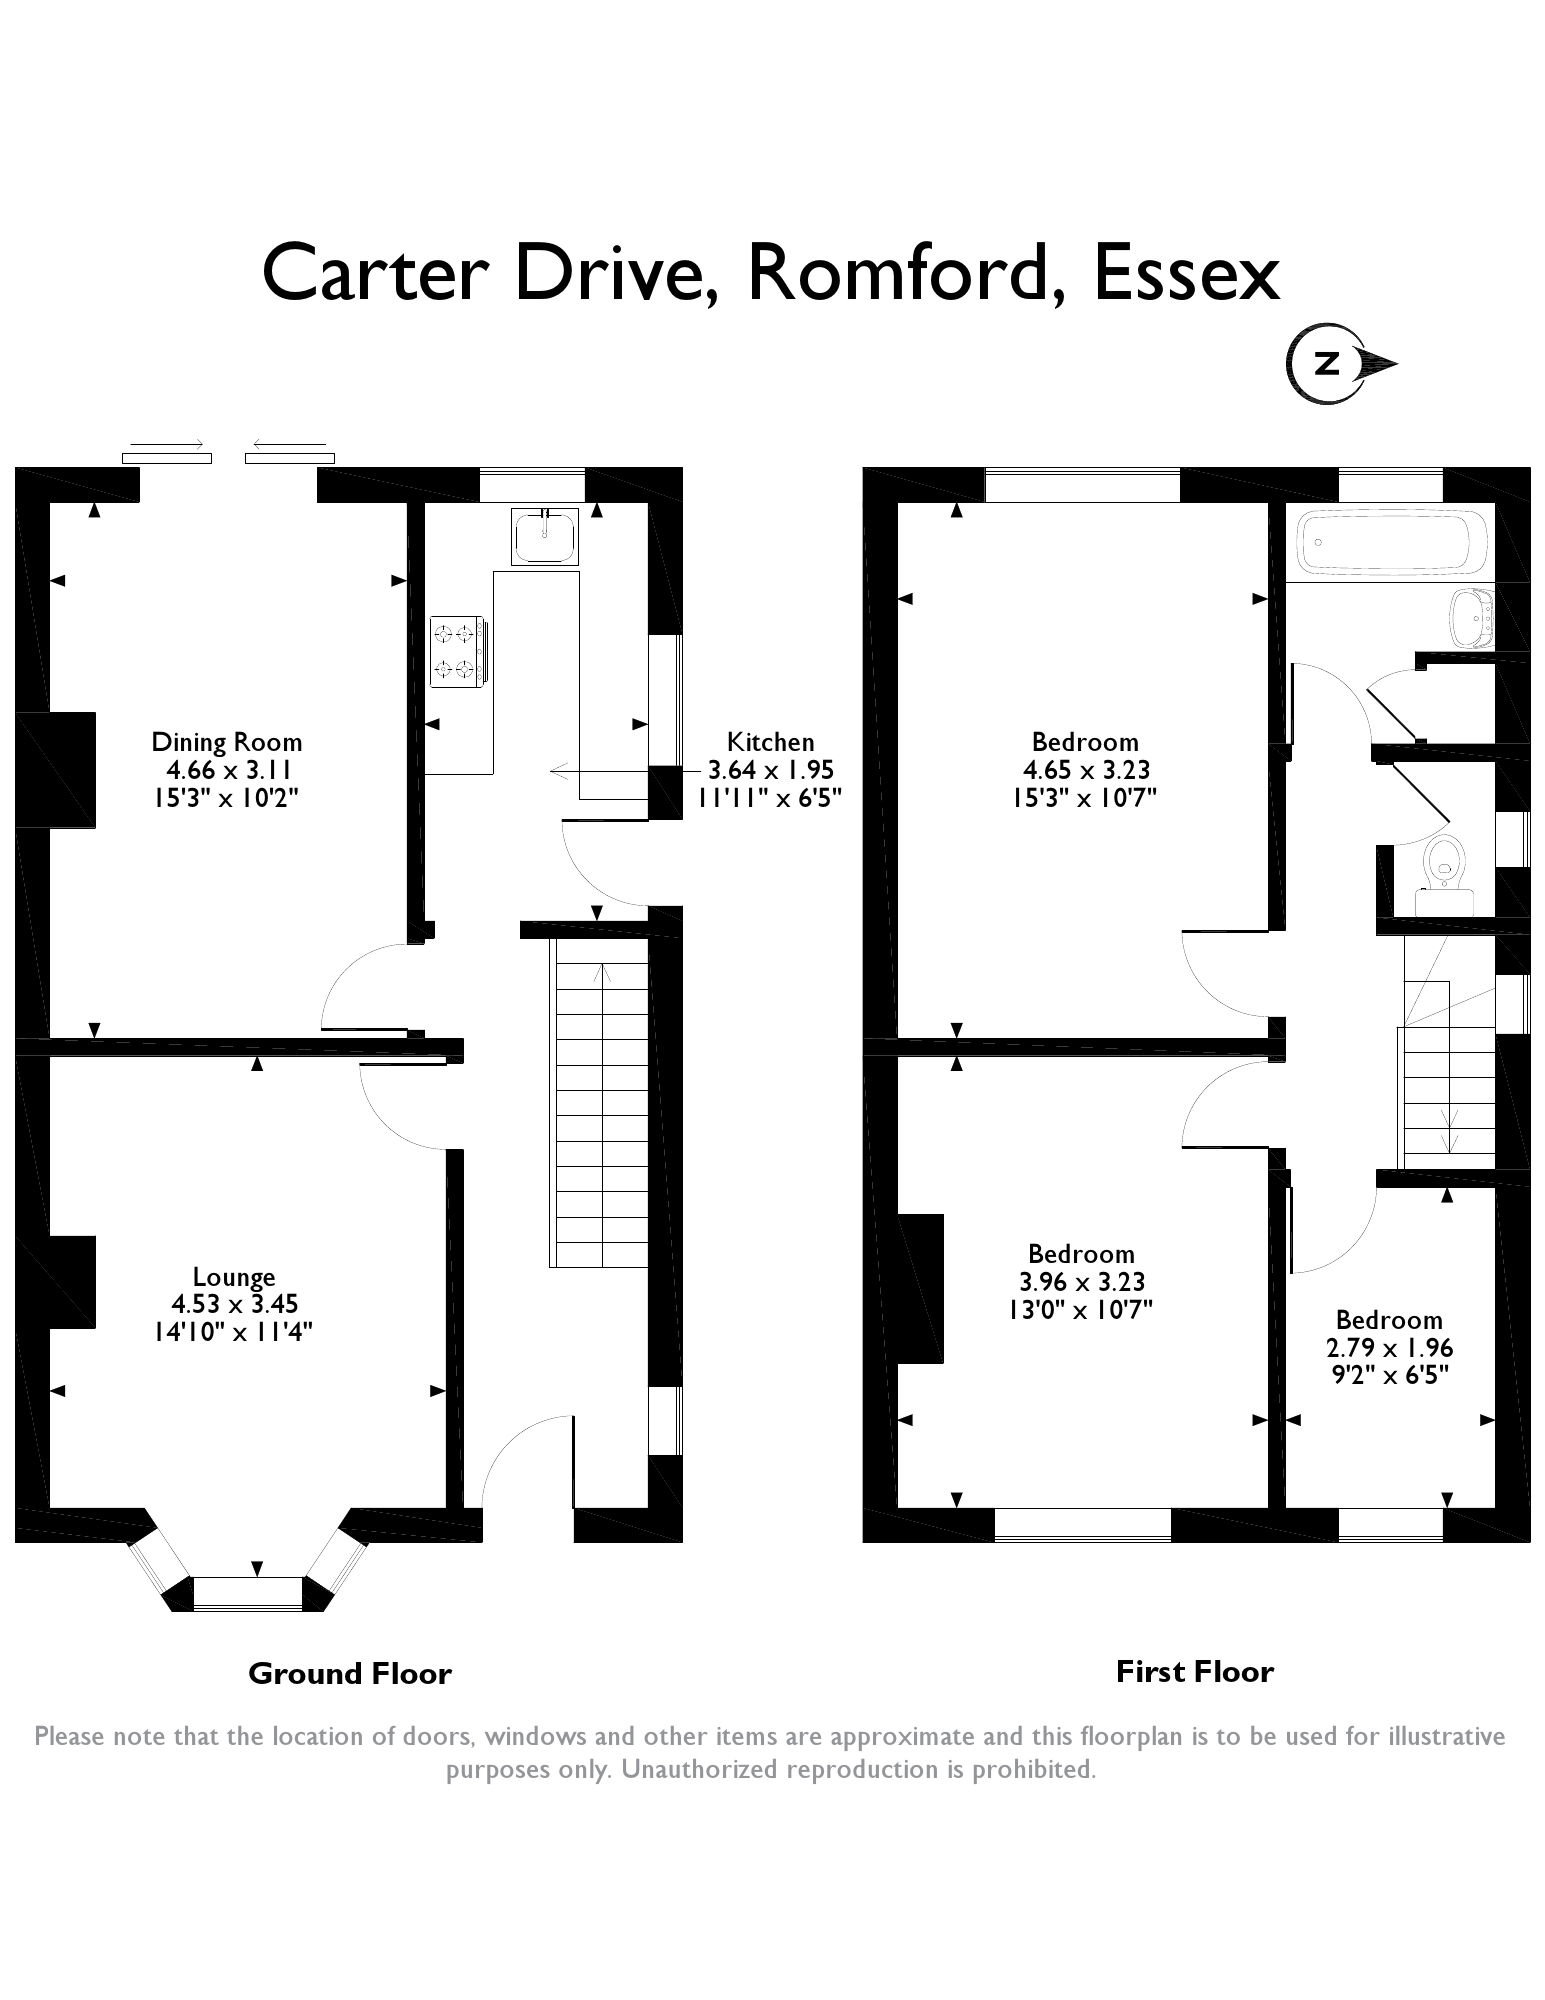 3 Bedrooms Semi-detached house for sale in Carter Drive, Romford RM5